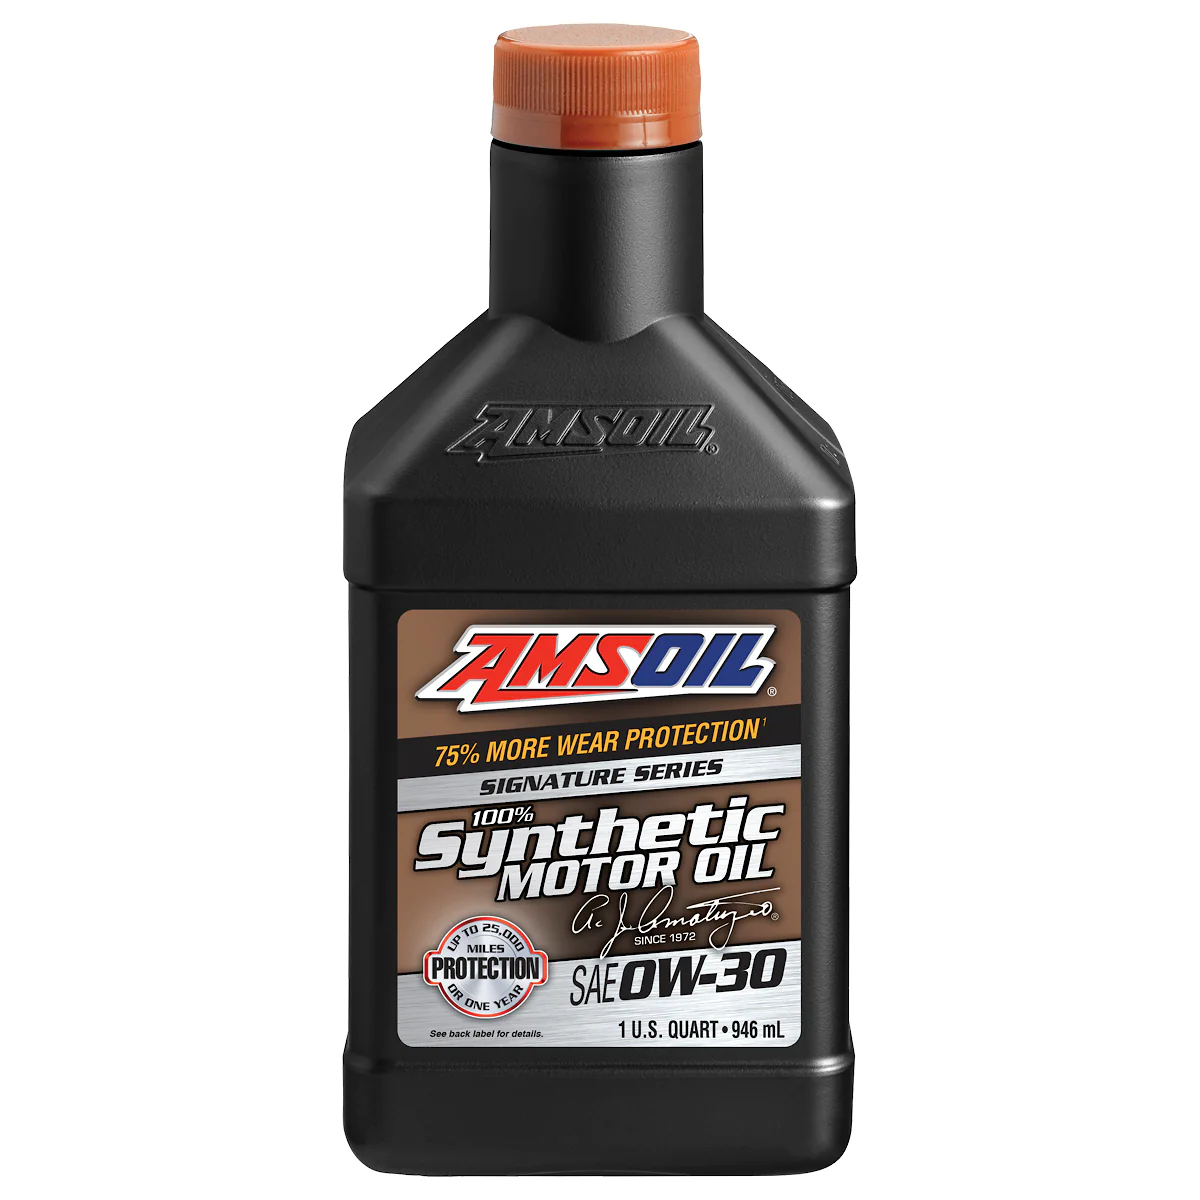 AMSOIL SIGNATURE SERIES 0W-30 100% SYNTHETIC MOTOR OIL